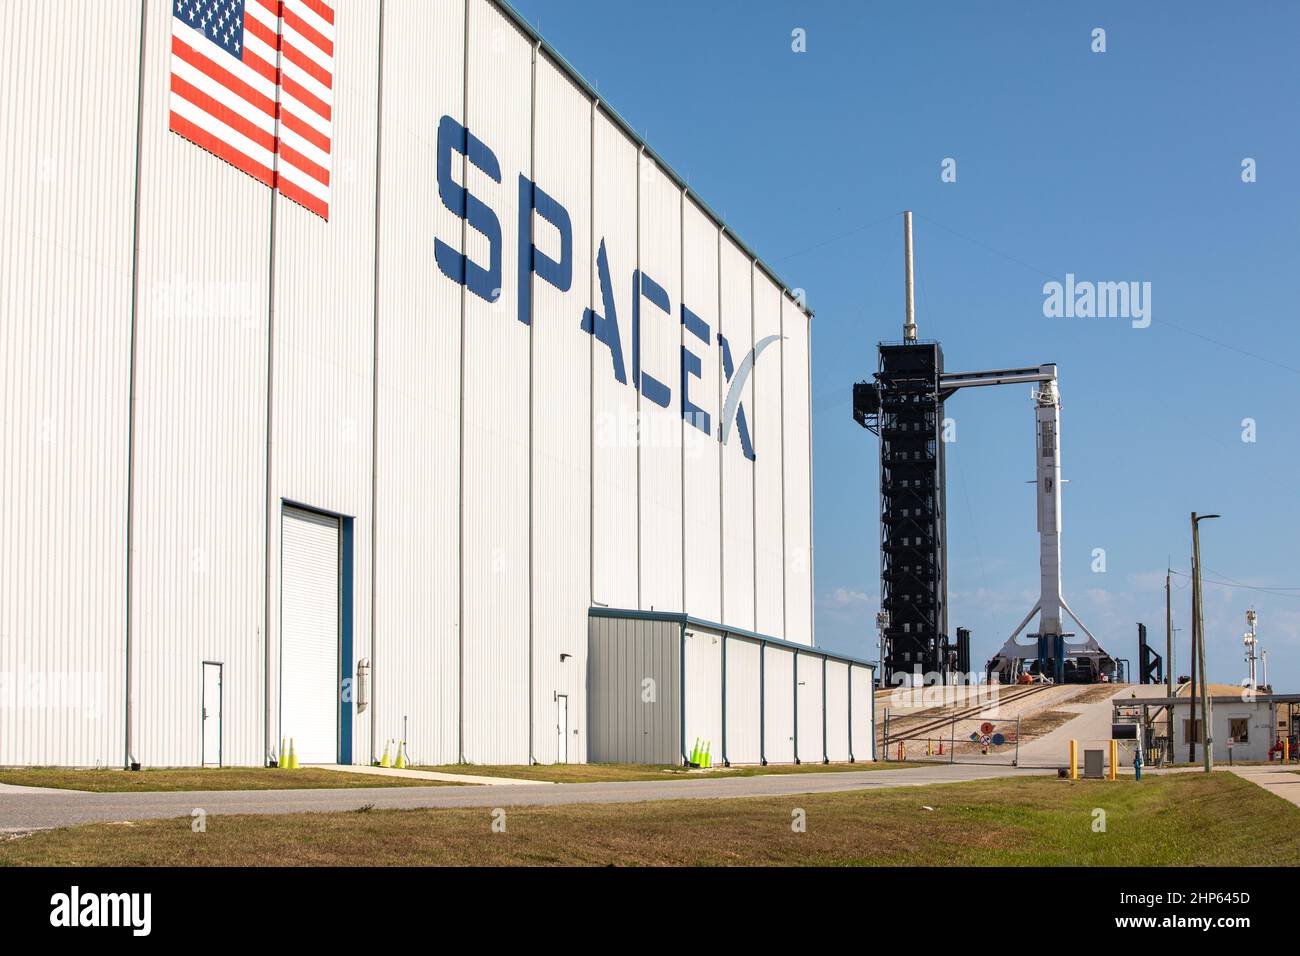 A SpaceX Falcon 9 rocket, with the Crew Dragon atop, stands poised for launch at historic Launch Complex 39A at NASA’s Kennedy Space Center in Florida on May 21, 2020, ahead of NASA’s SpaceX Demo-2 mission. The rocket and spacecraft will carry NASA astronauts Robert Behnken and Douglas Hurley to the International Space Station as part of the agency’s Commercial Crew Program, returning human spaceflight capability to the U.S. after nearly a decade. This will be SpaceX’s final flight test, paving the way for NASA to certify the crew transportation system for regular, crewed flights to the orbiti Stock Photo